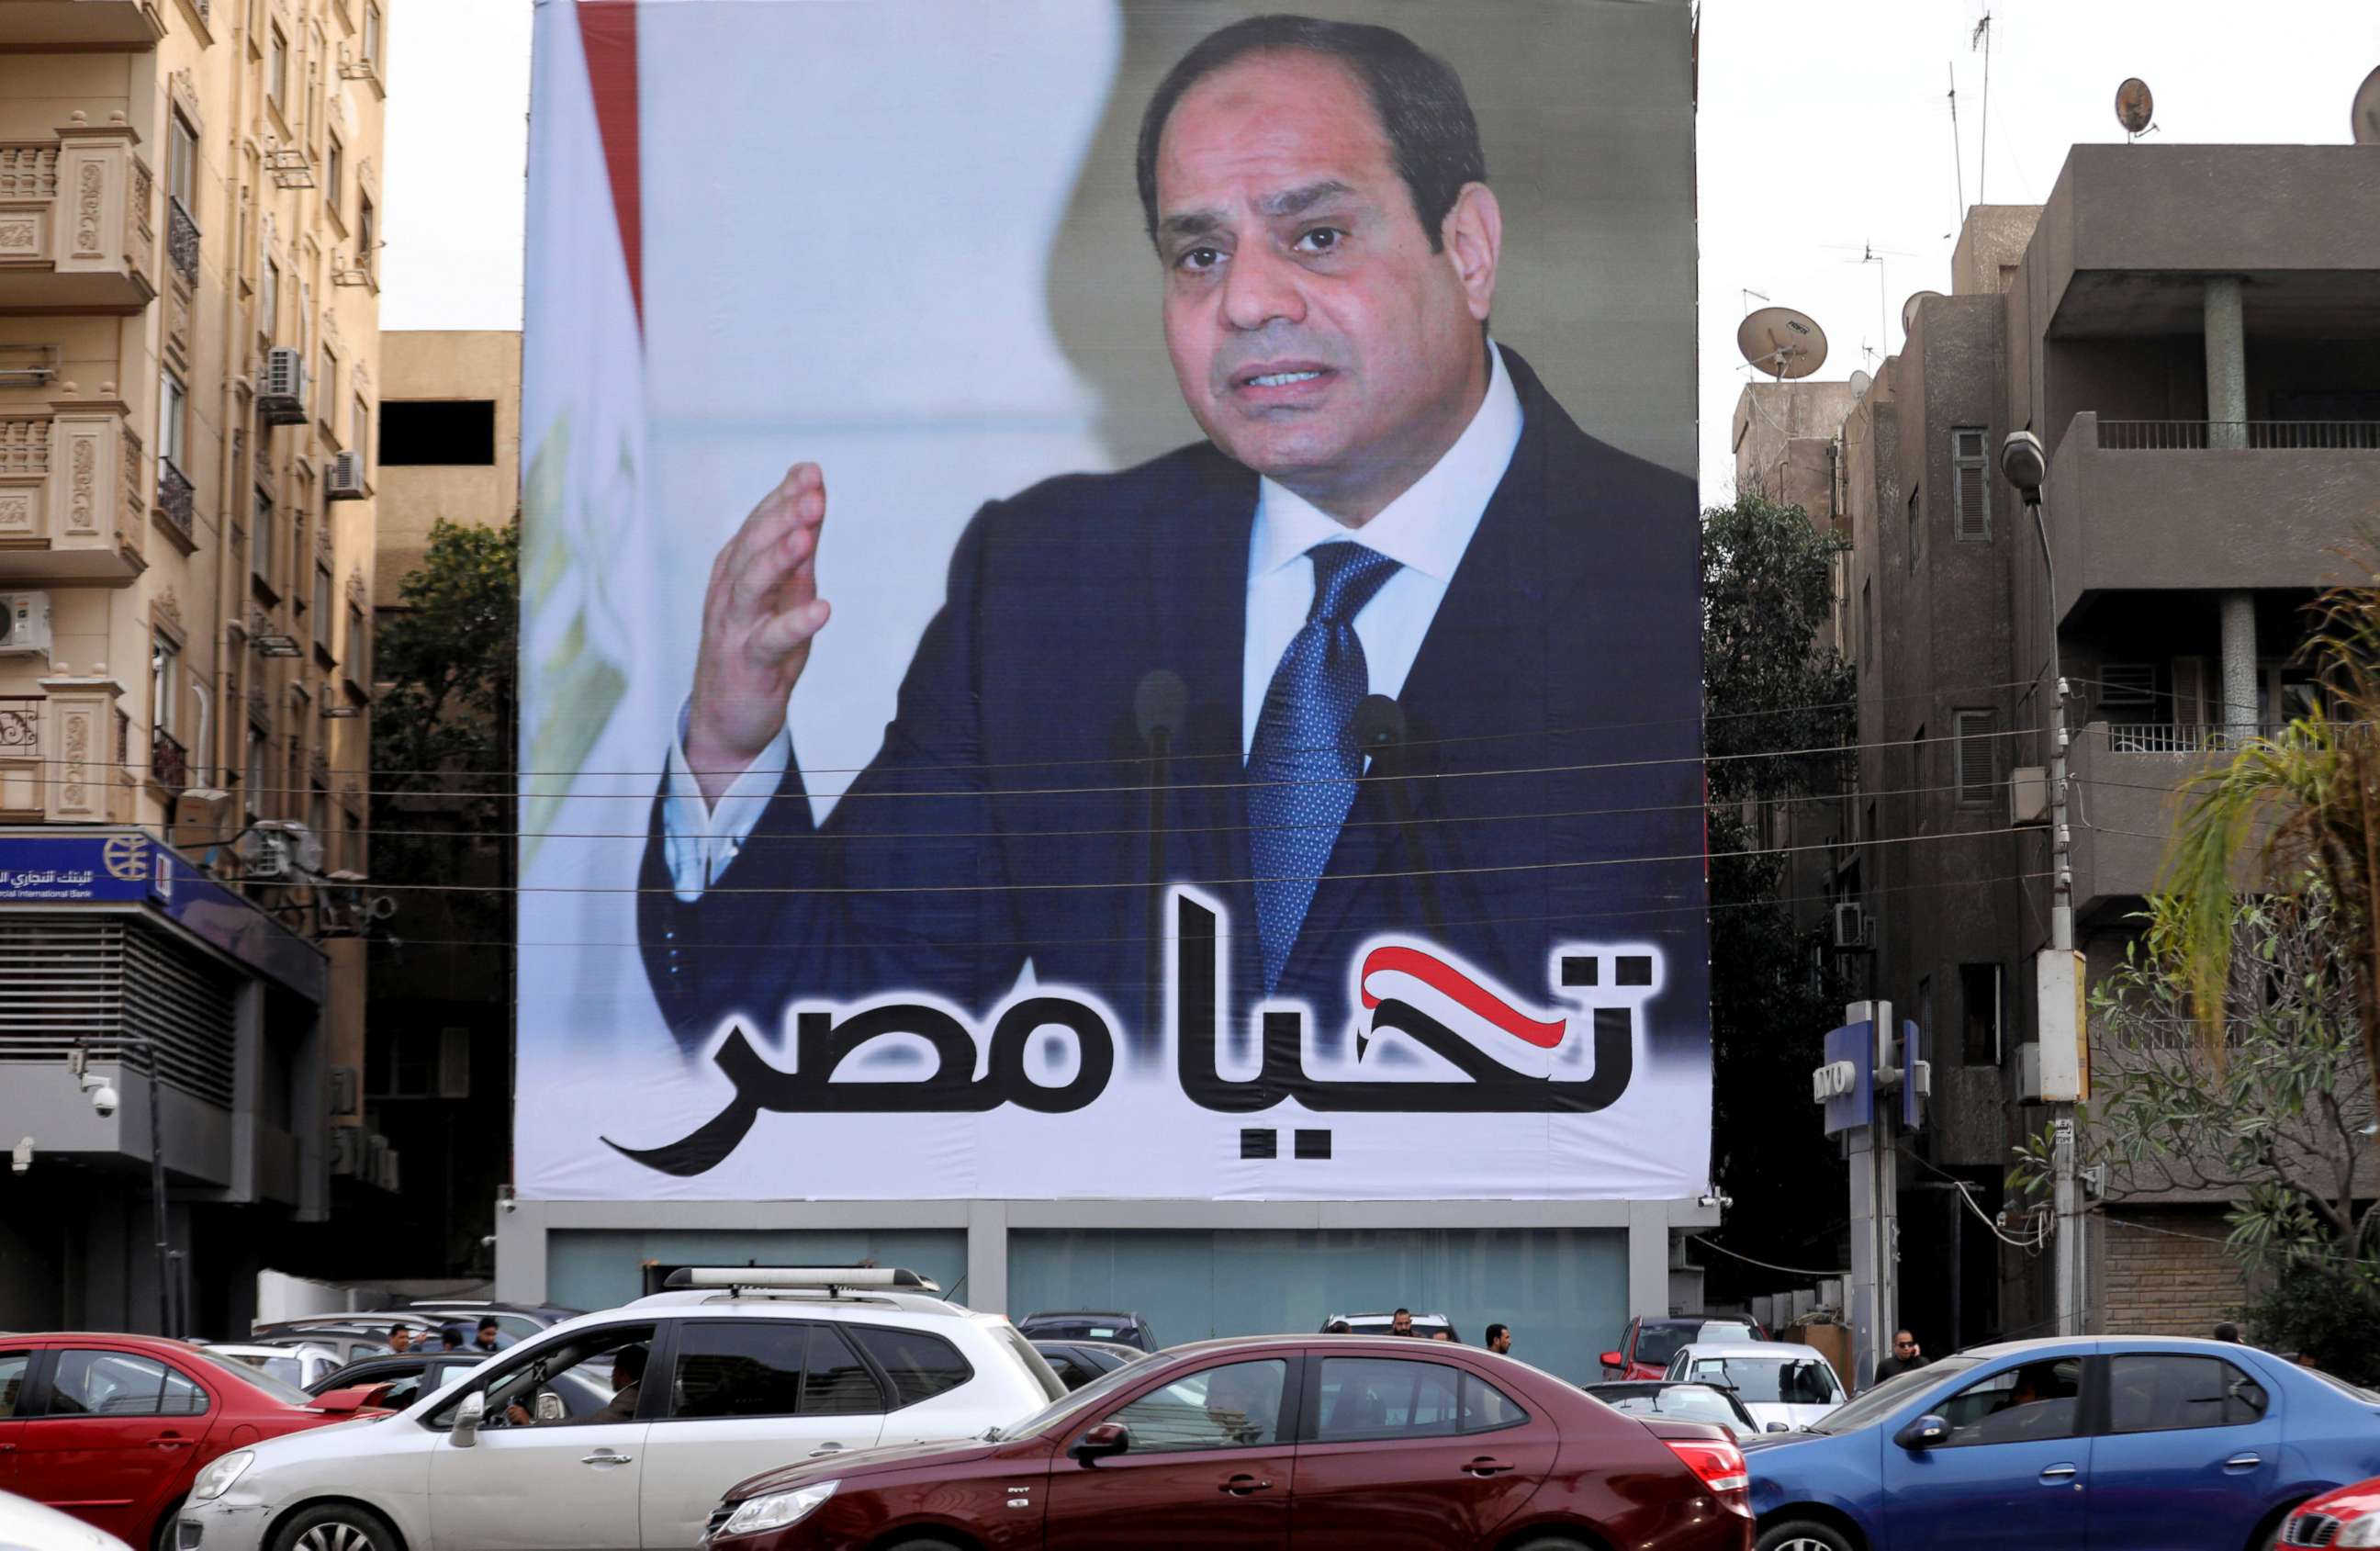 PHOTO: Cars pass by a poster of Egypt's President Abdel Fattah al-Sisi for the upcoming presidential election, in Cairo, Egypt, Feb. 19, 2018. The writing on the poster reads: "Long live Egypt."